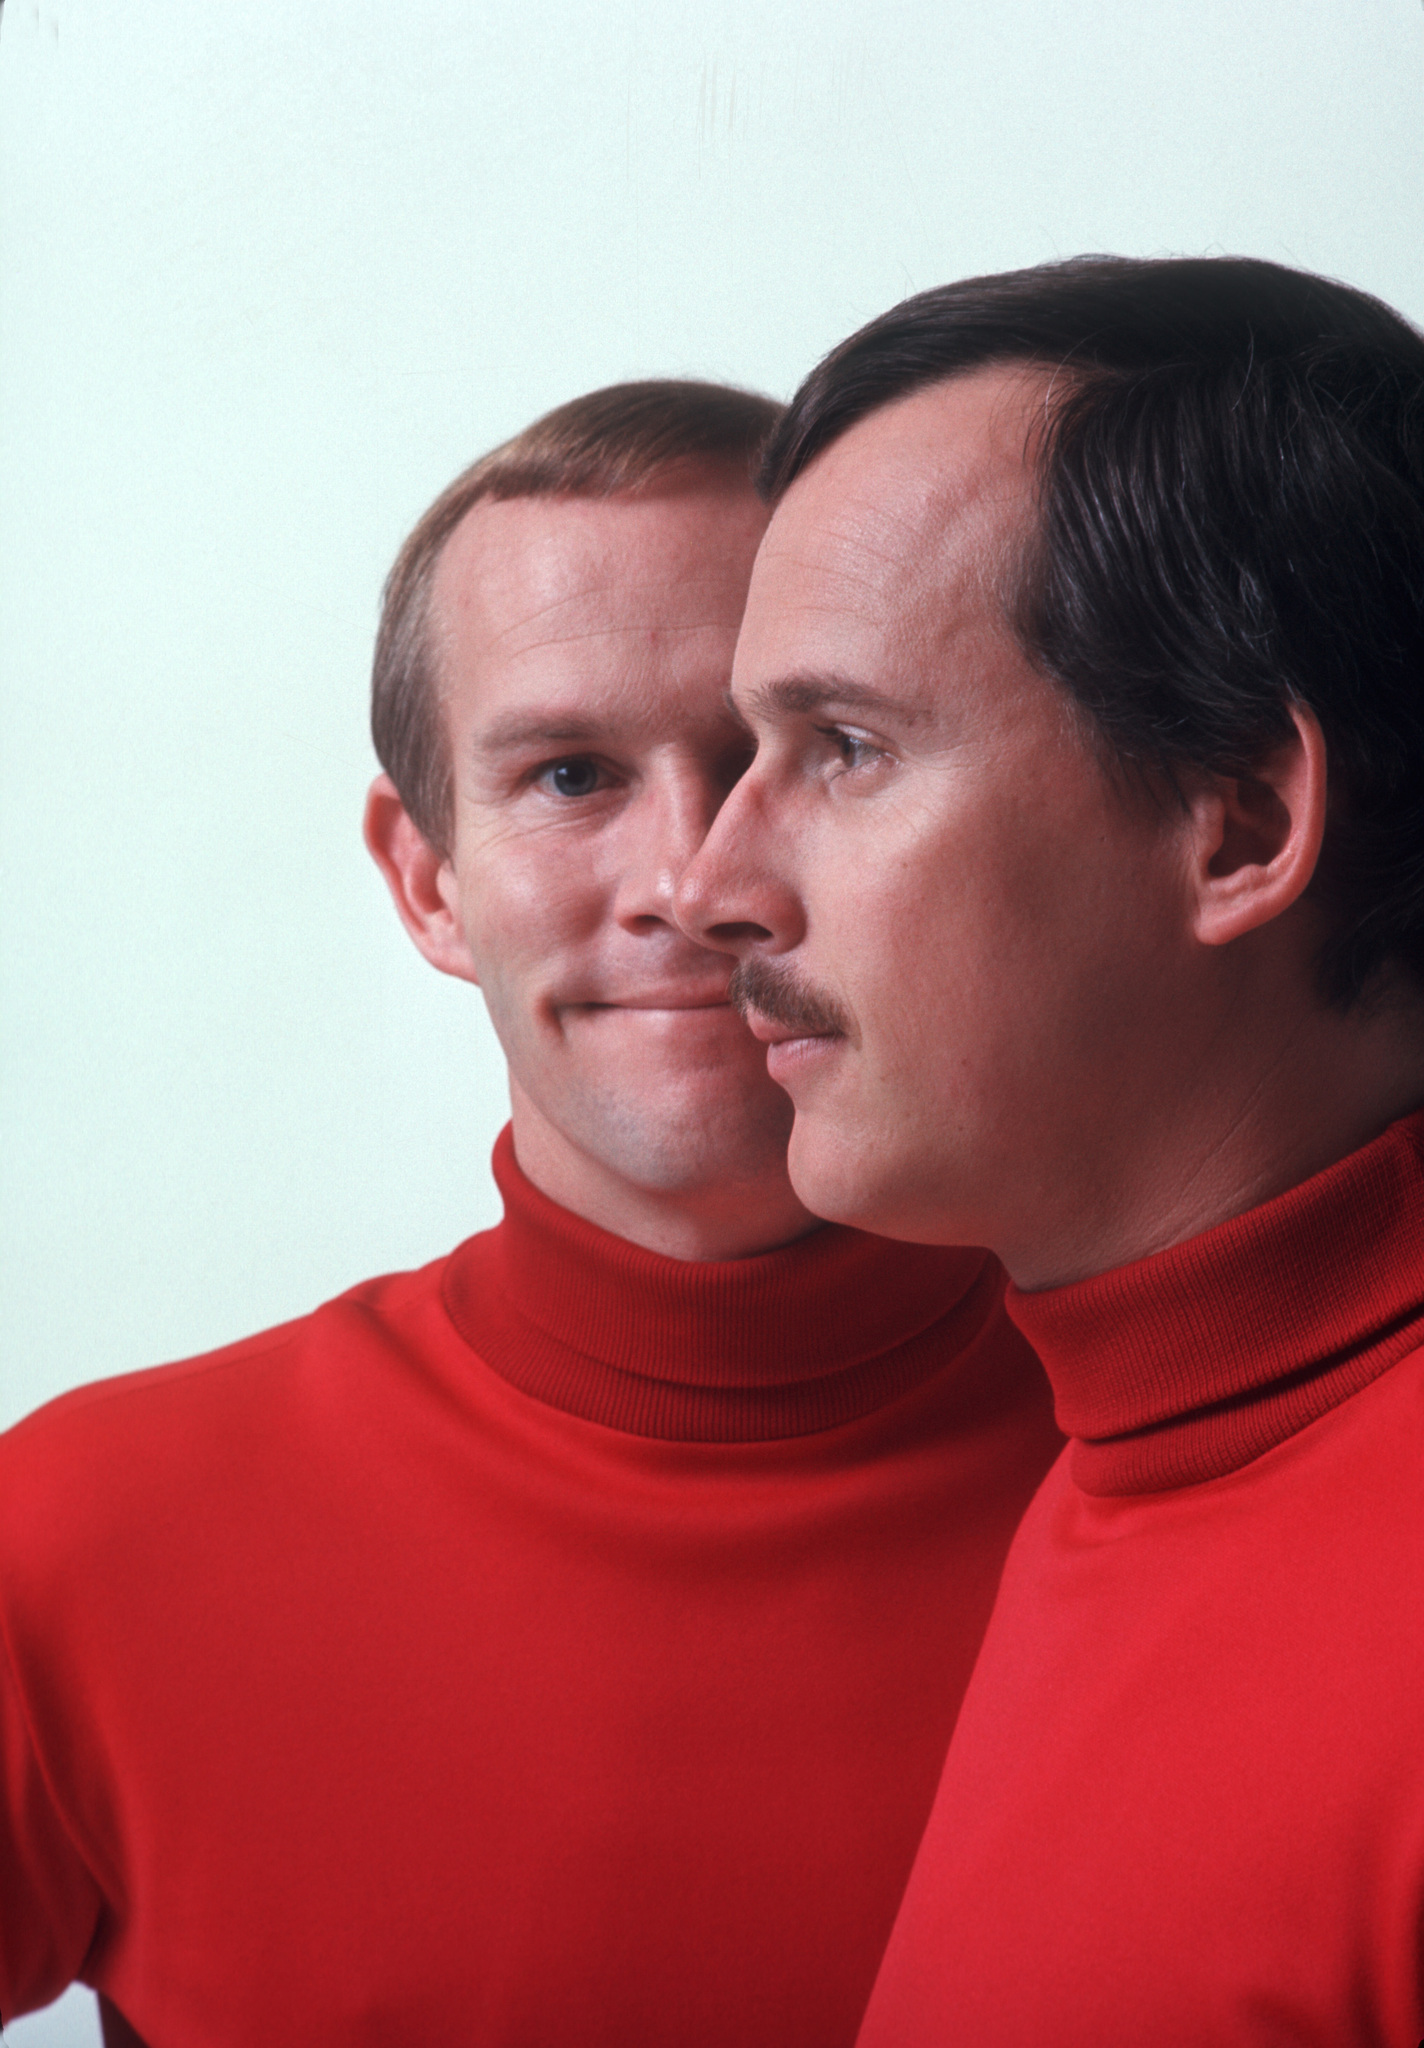 Smothers Brothers Feb. 1969